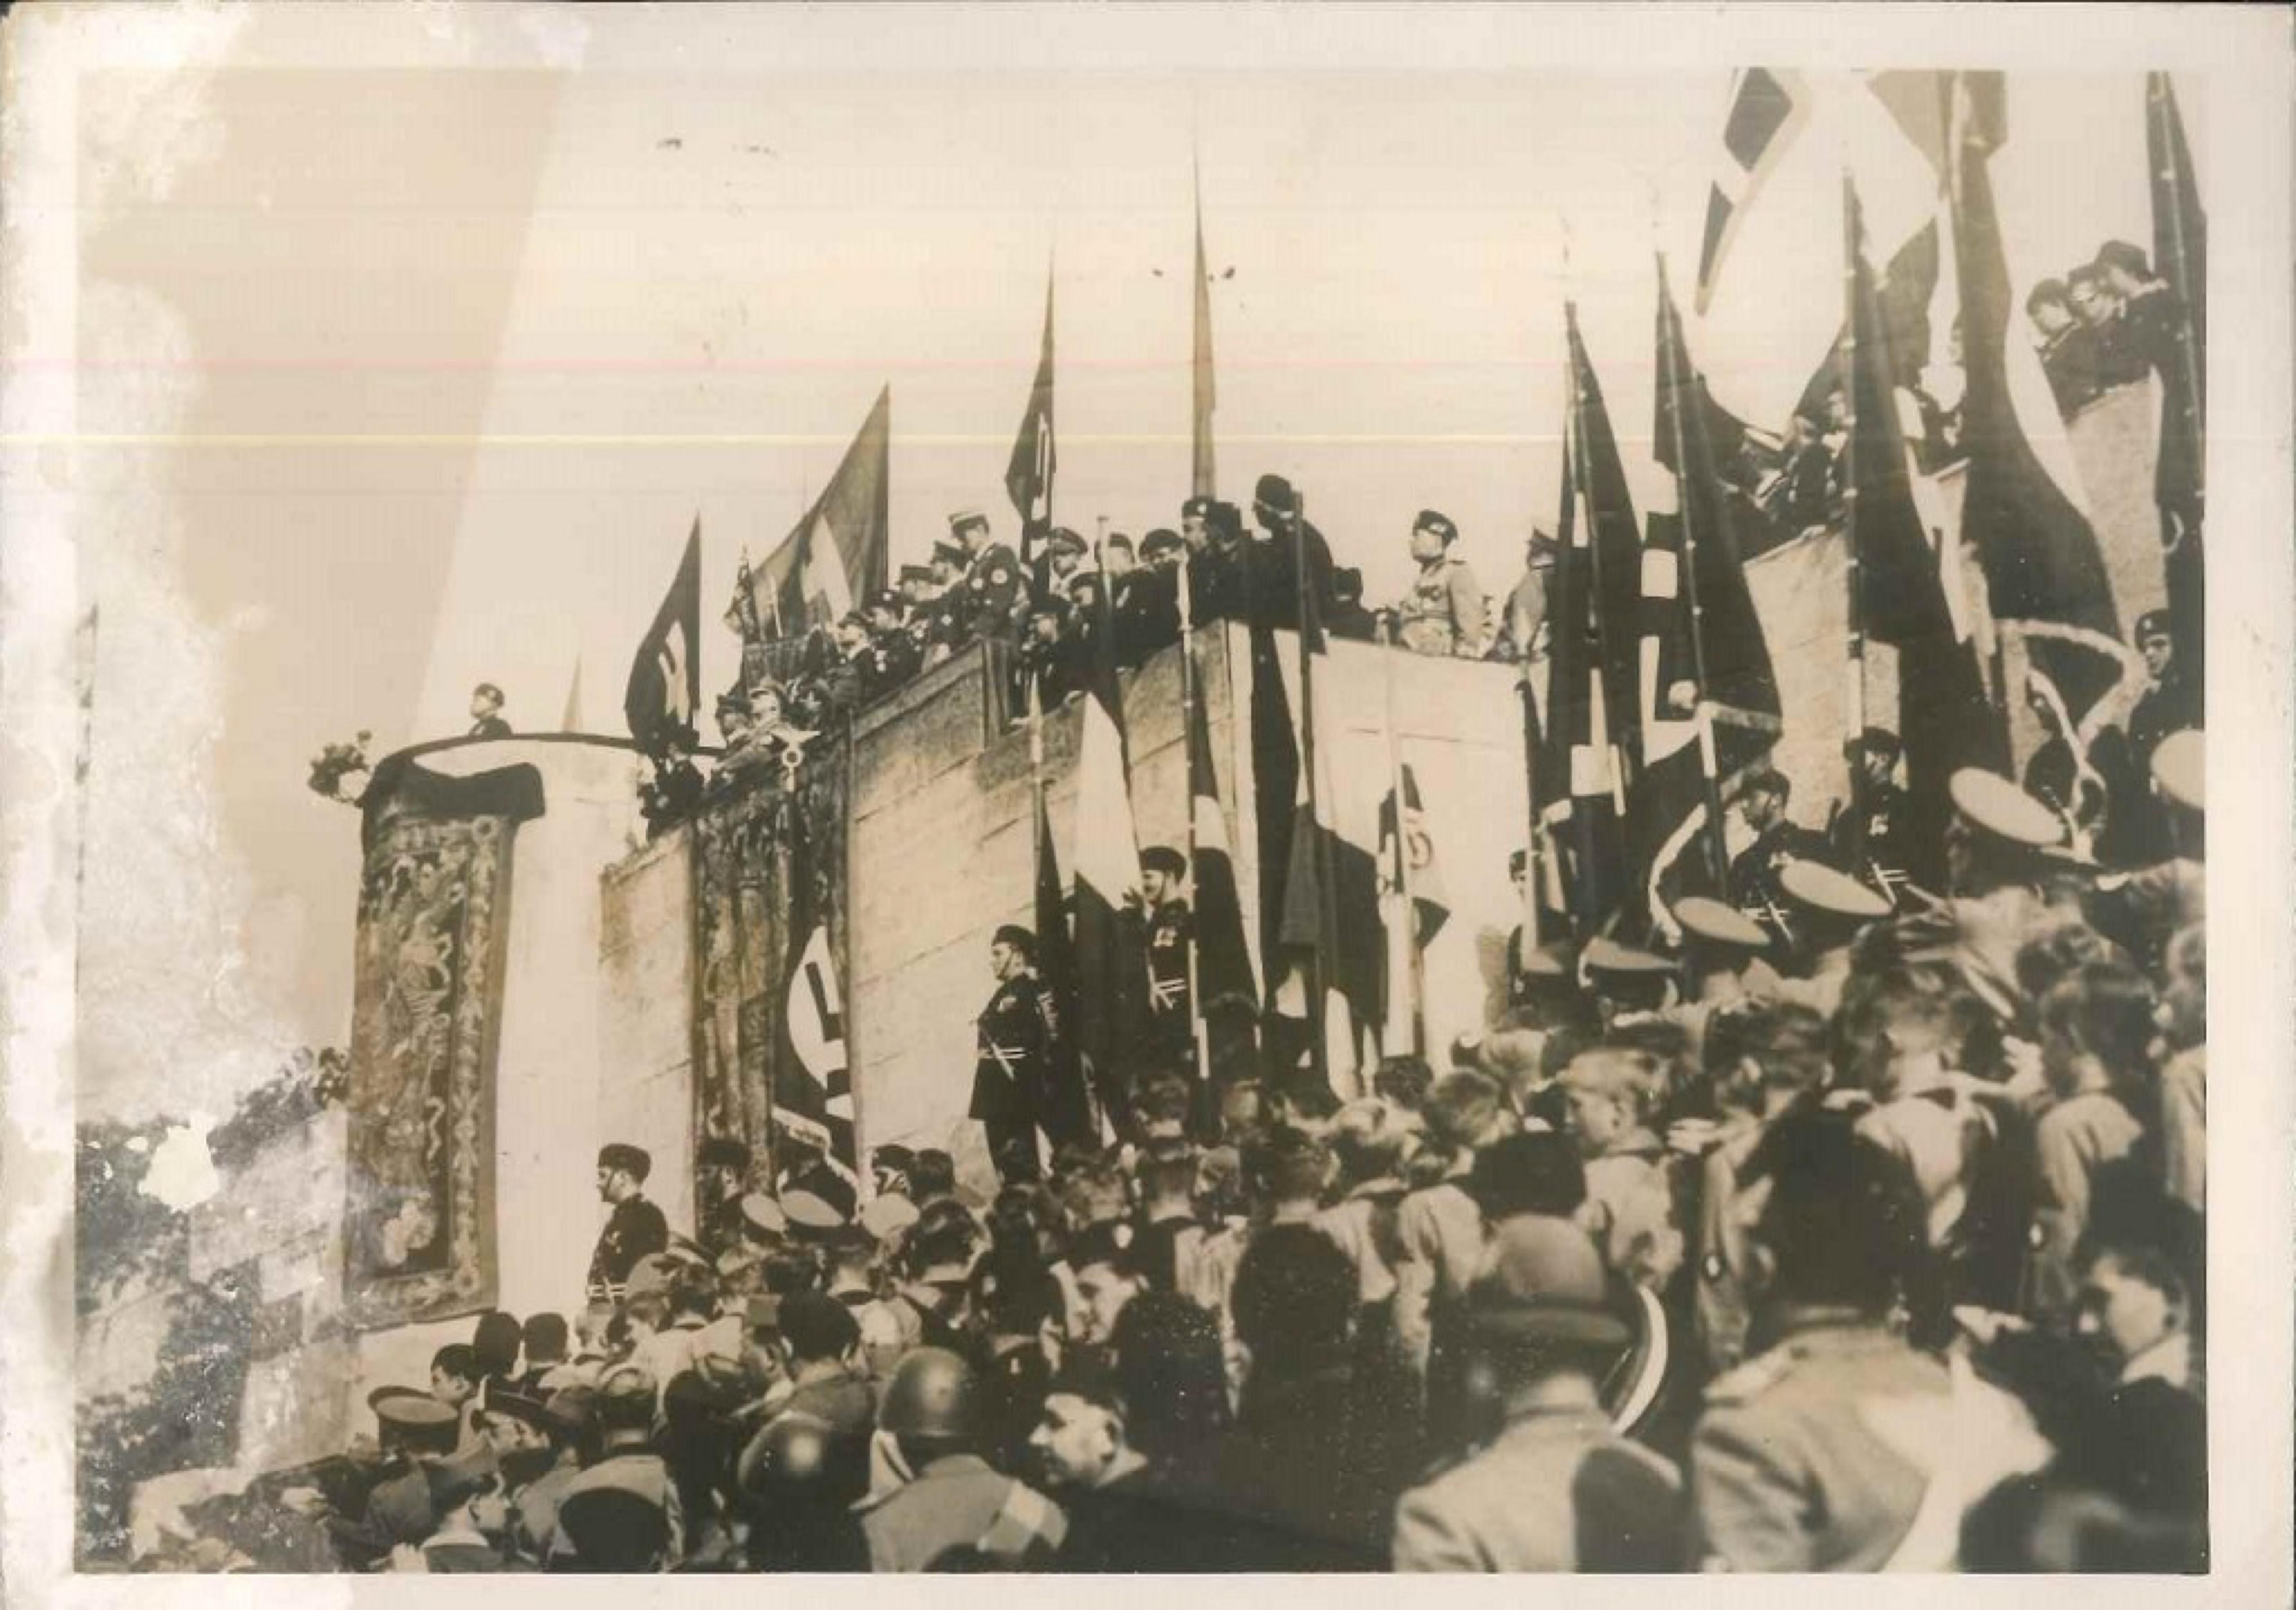 Unknown Figurative Photograph - The Anniversary of the March to Rome - Vintage Photo - 1930s